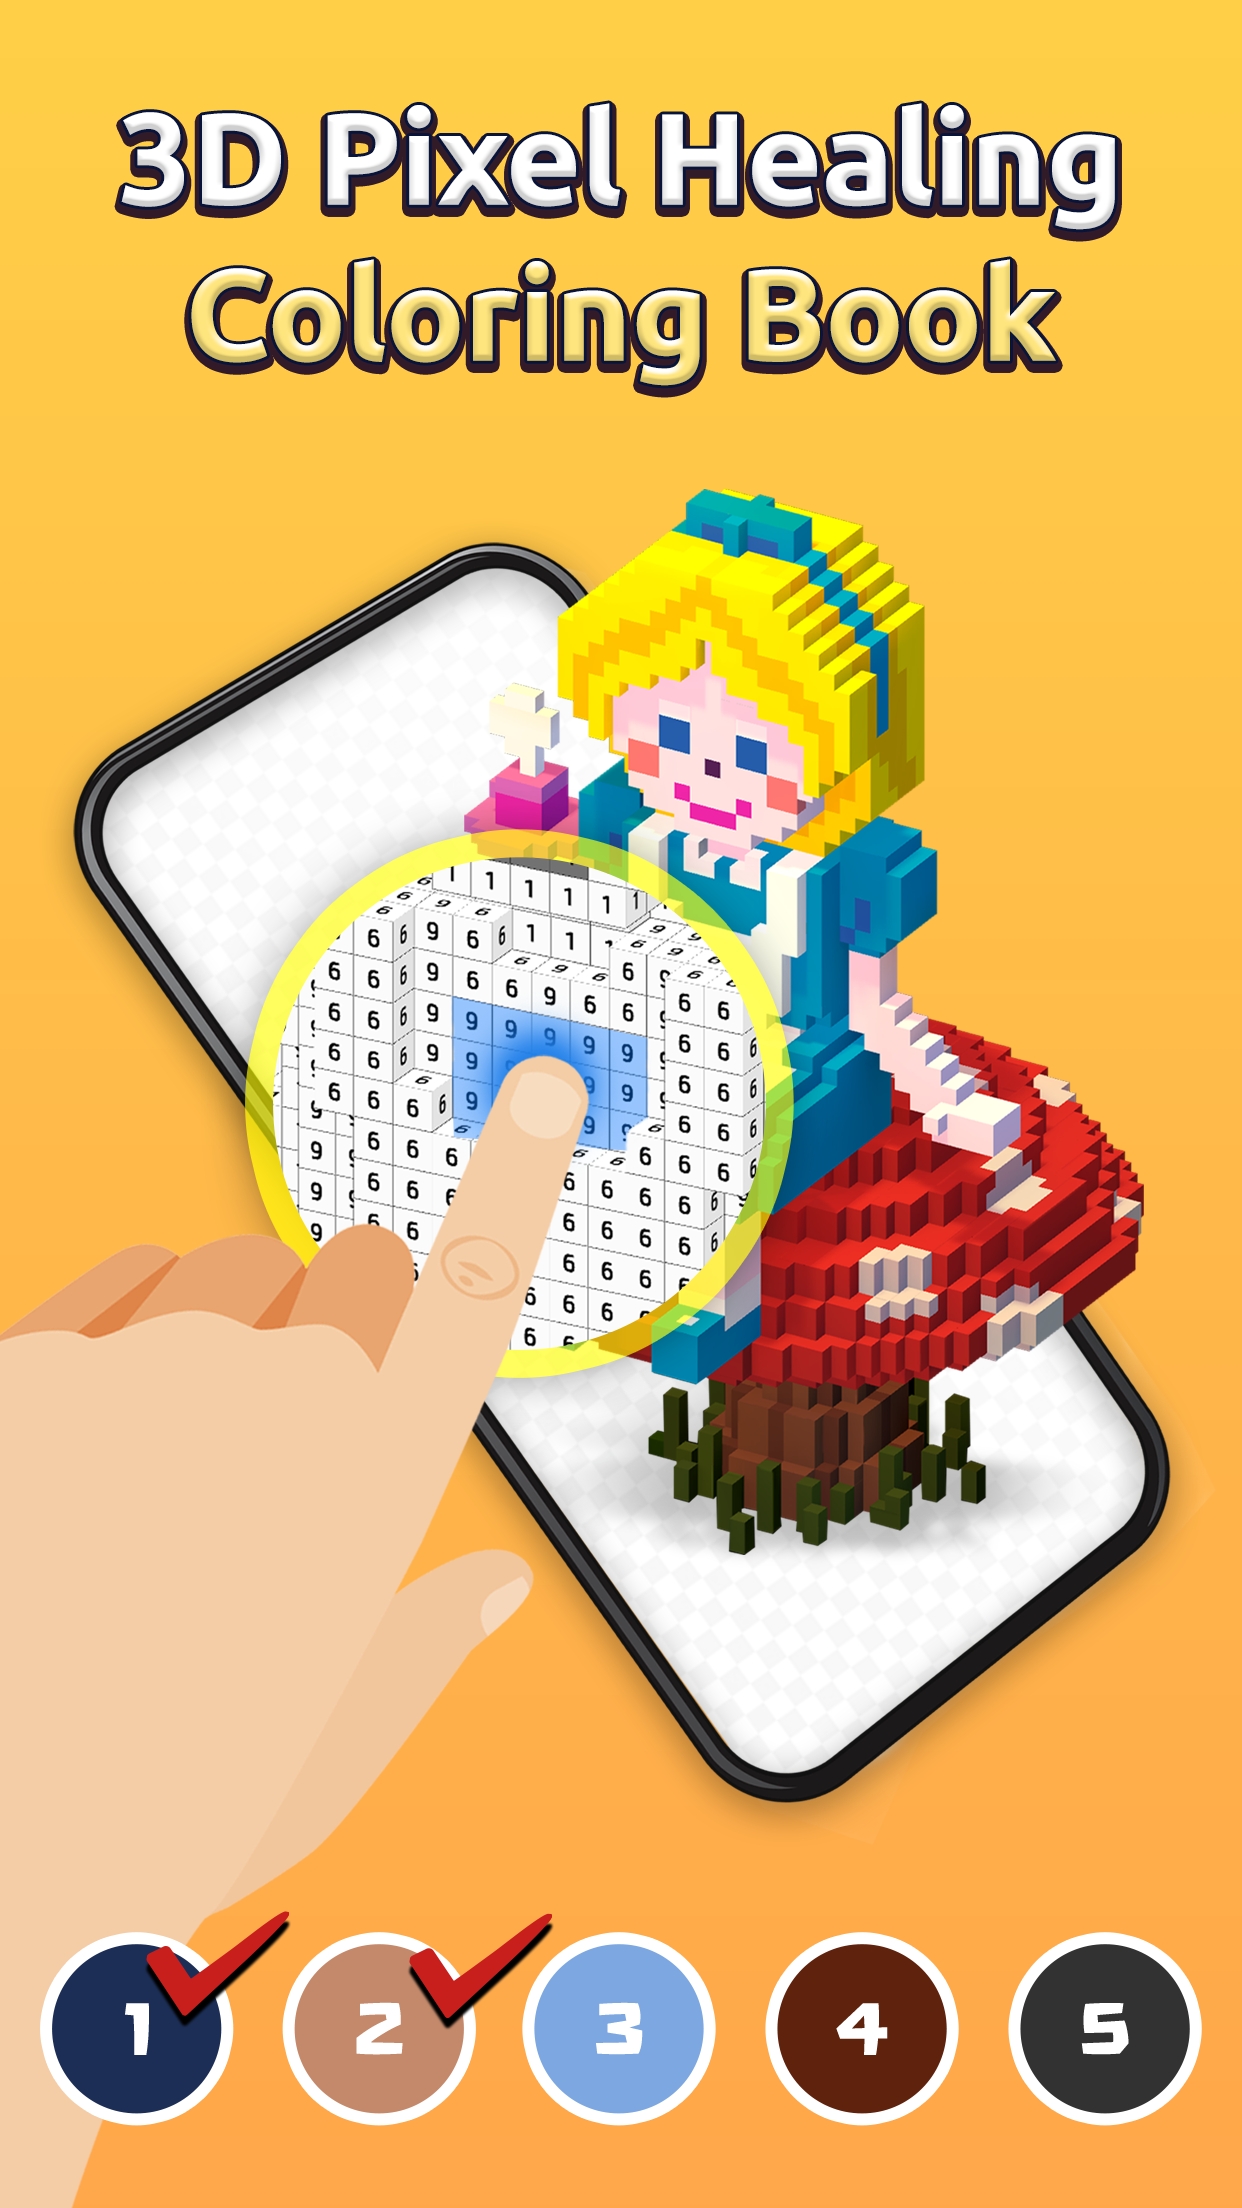 Download Buff Studio Globally Launches My Coloring A Mobile 3d Pixel Art Coloring Book Game Business Wire